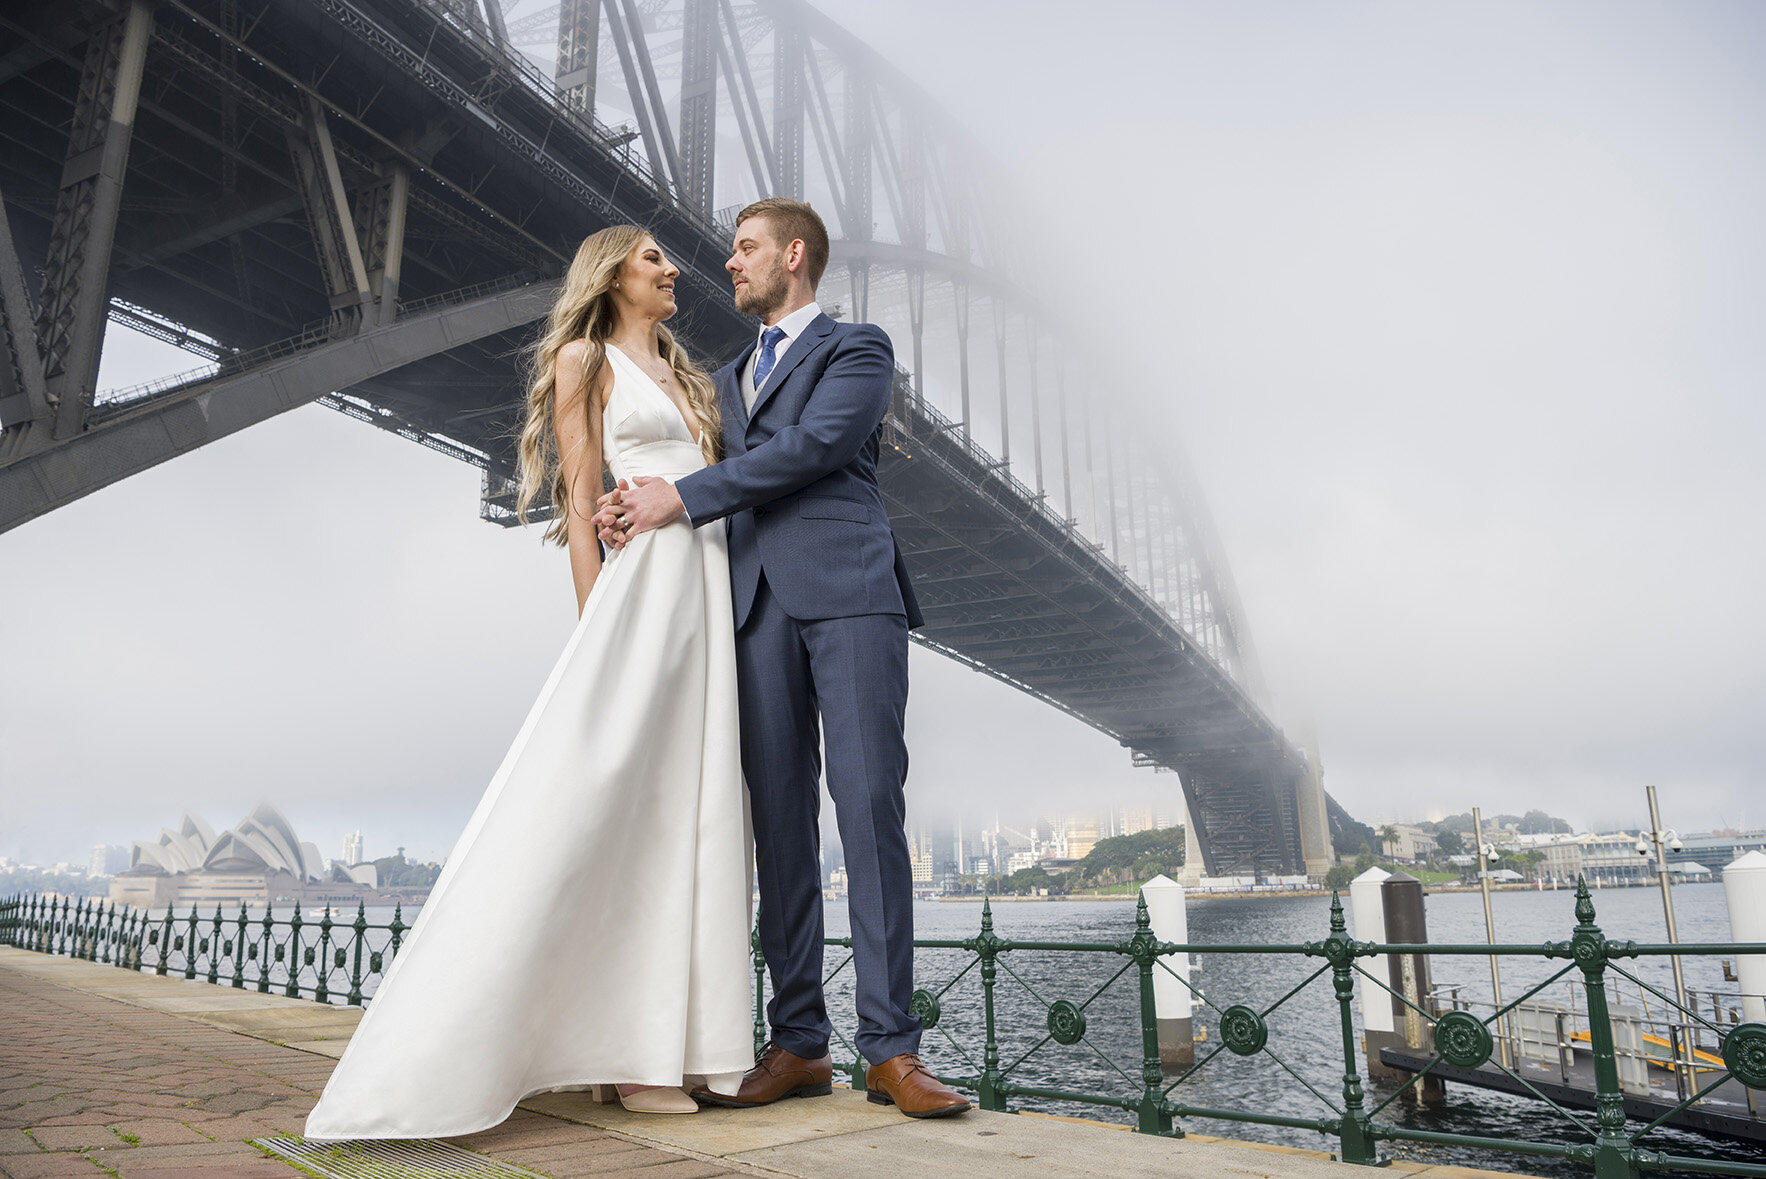 A couple just married wearing a long white dress and blue and silver suite embrace under the Sydney Harbour Bridge on a foggy morning